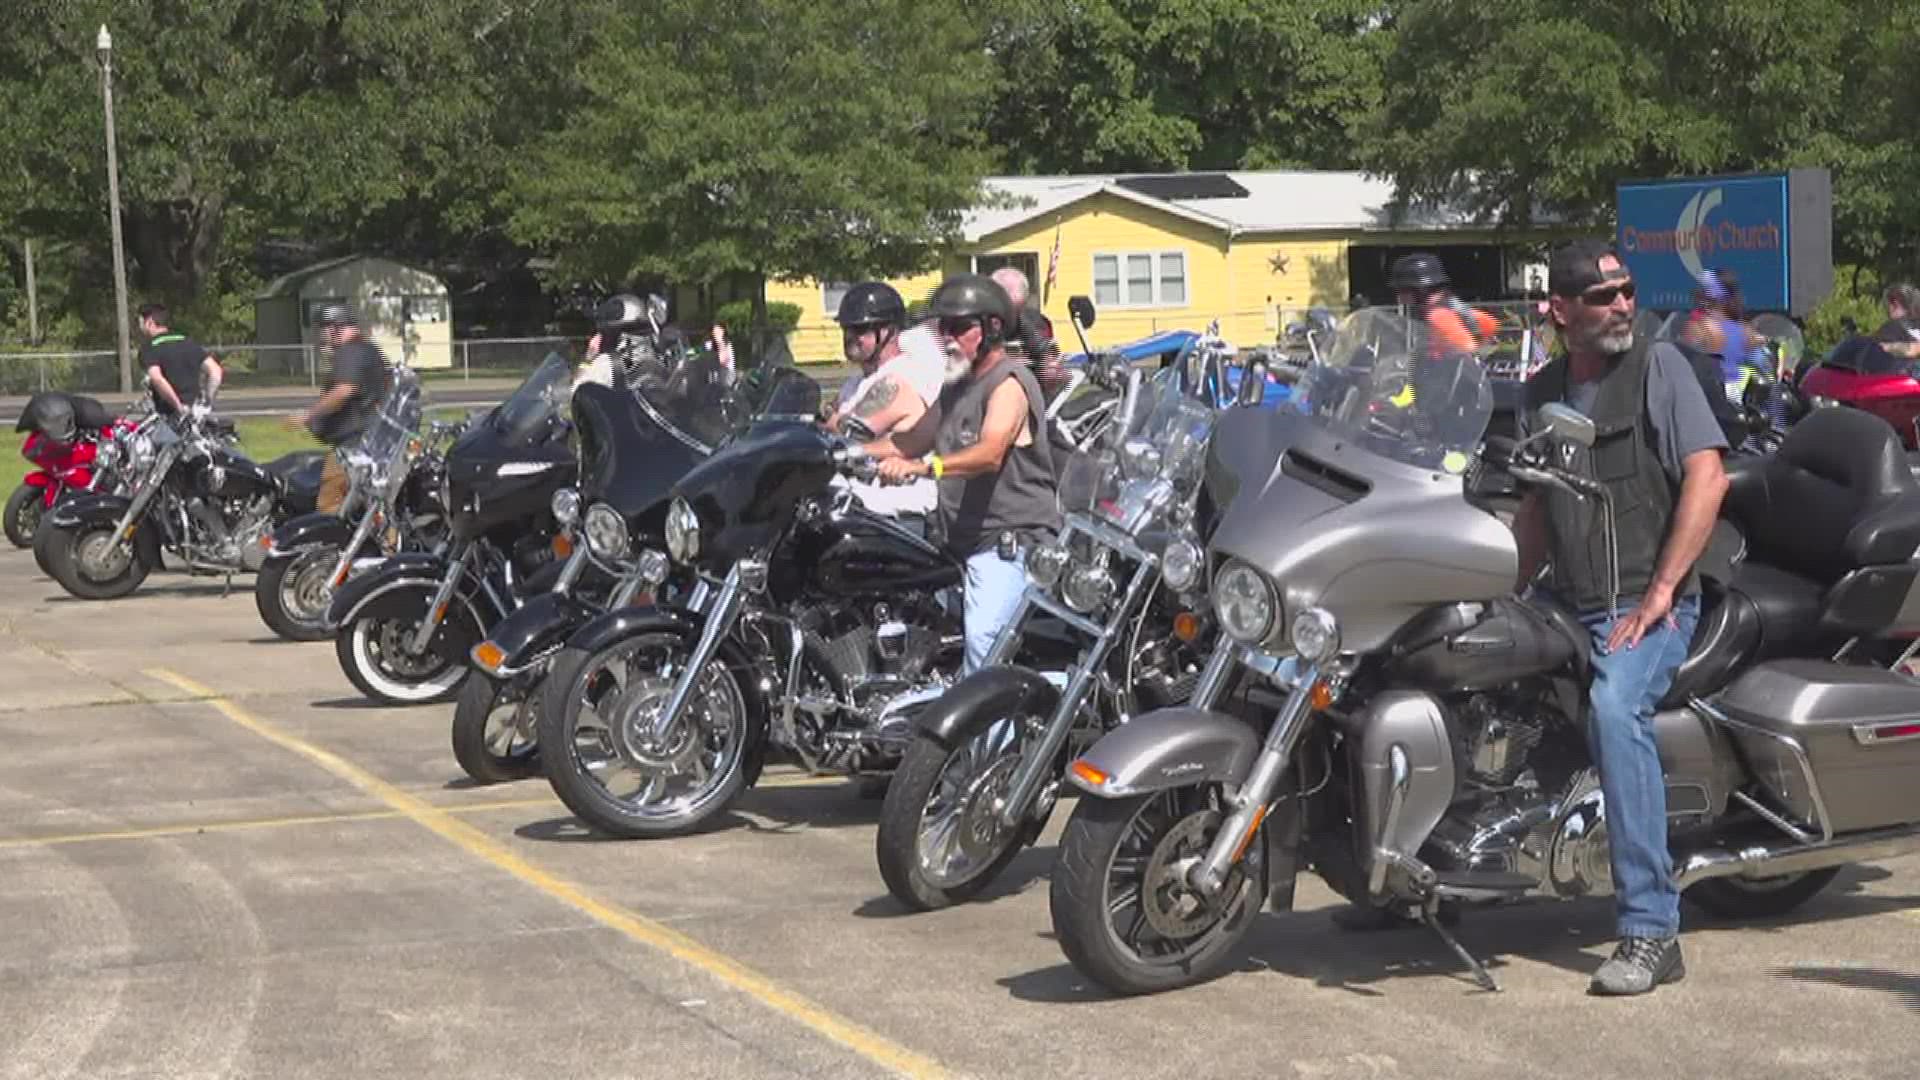 Motorcyclists from across the state came together in Southeast Texas to raise awareness for road safety and honor those that lost their lives in crashes.